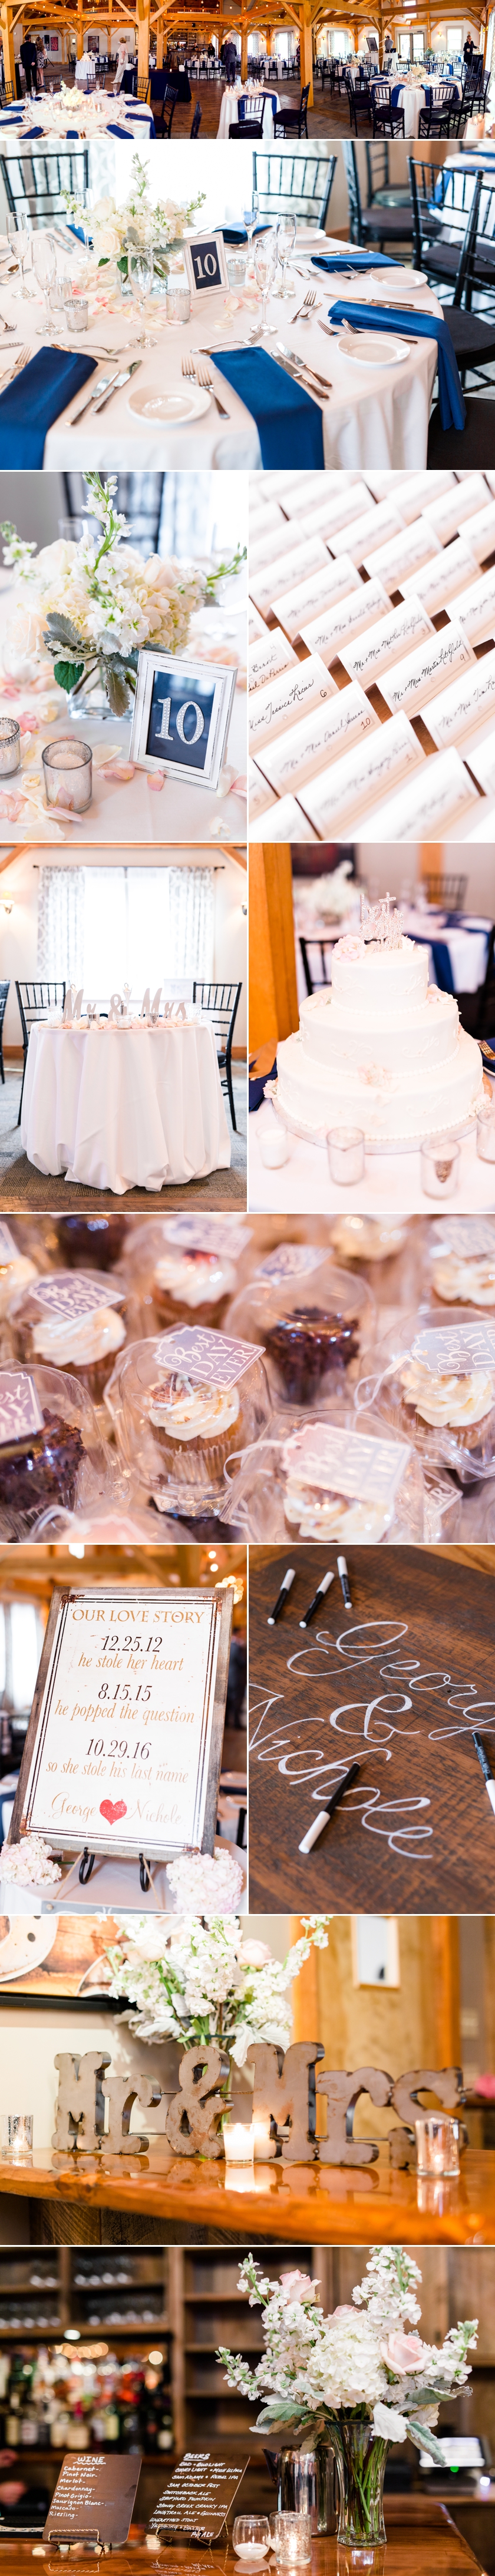 photo of the reception details at nichole and george's classic wedding at the wight barn in sturbridge massachusetts